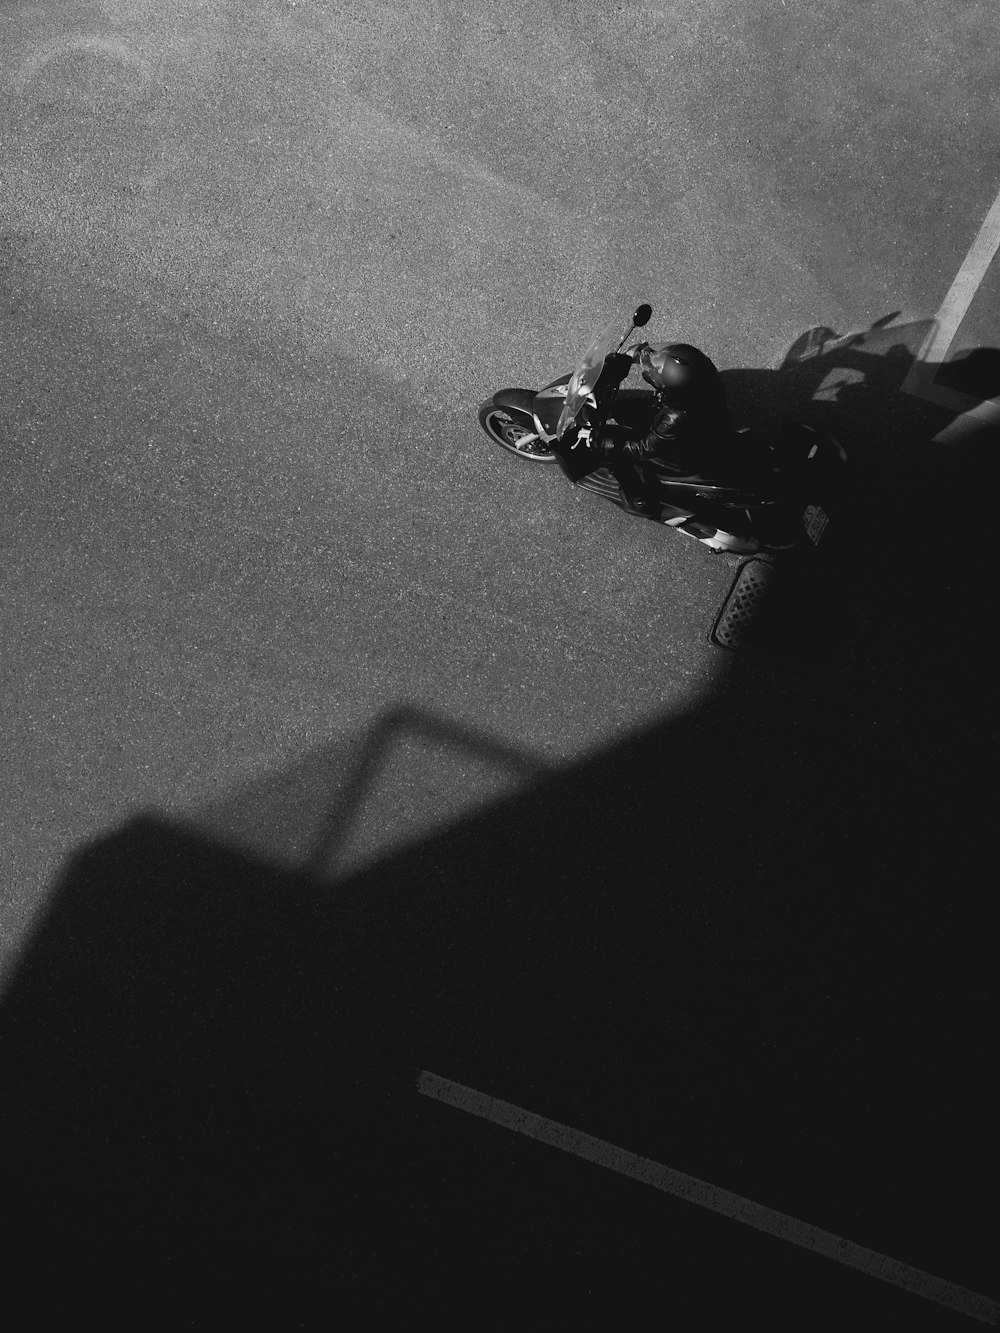 a person on a motorcycle